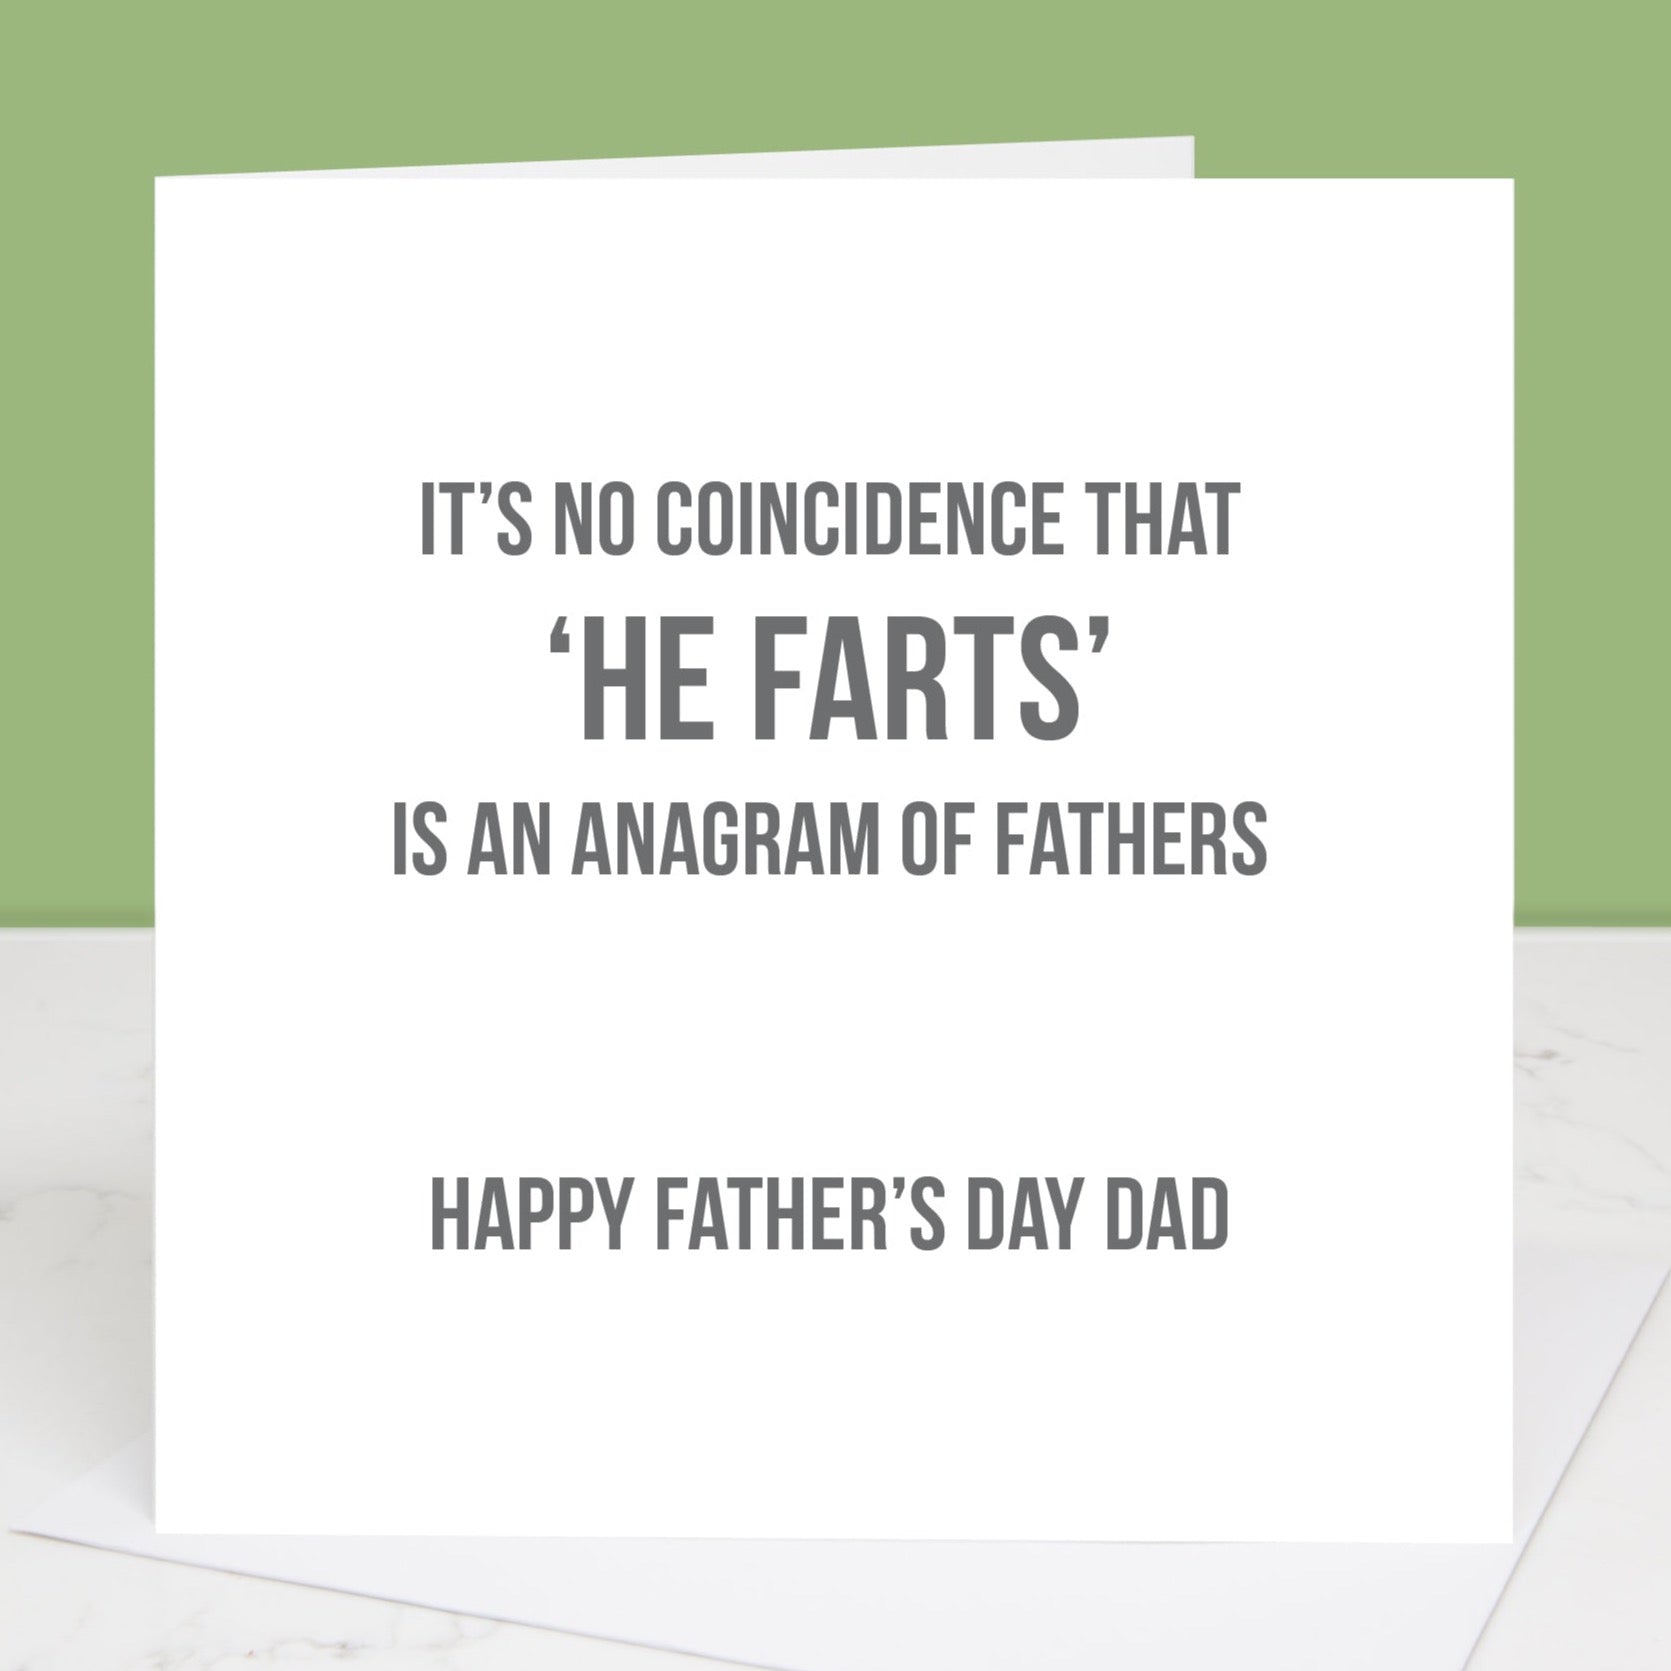 Anagram Father's Day card All images and designs © Slice of Pie Designs